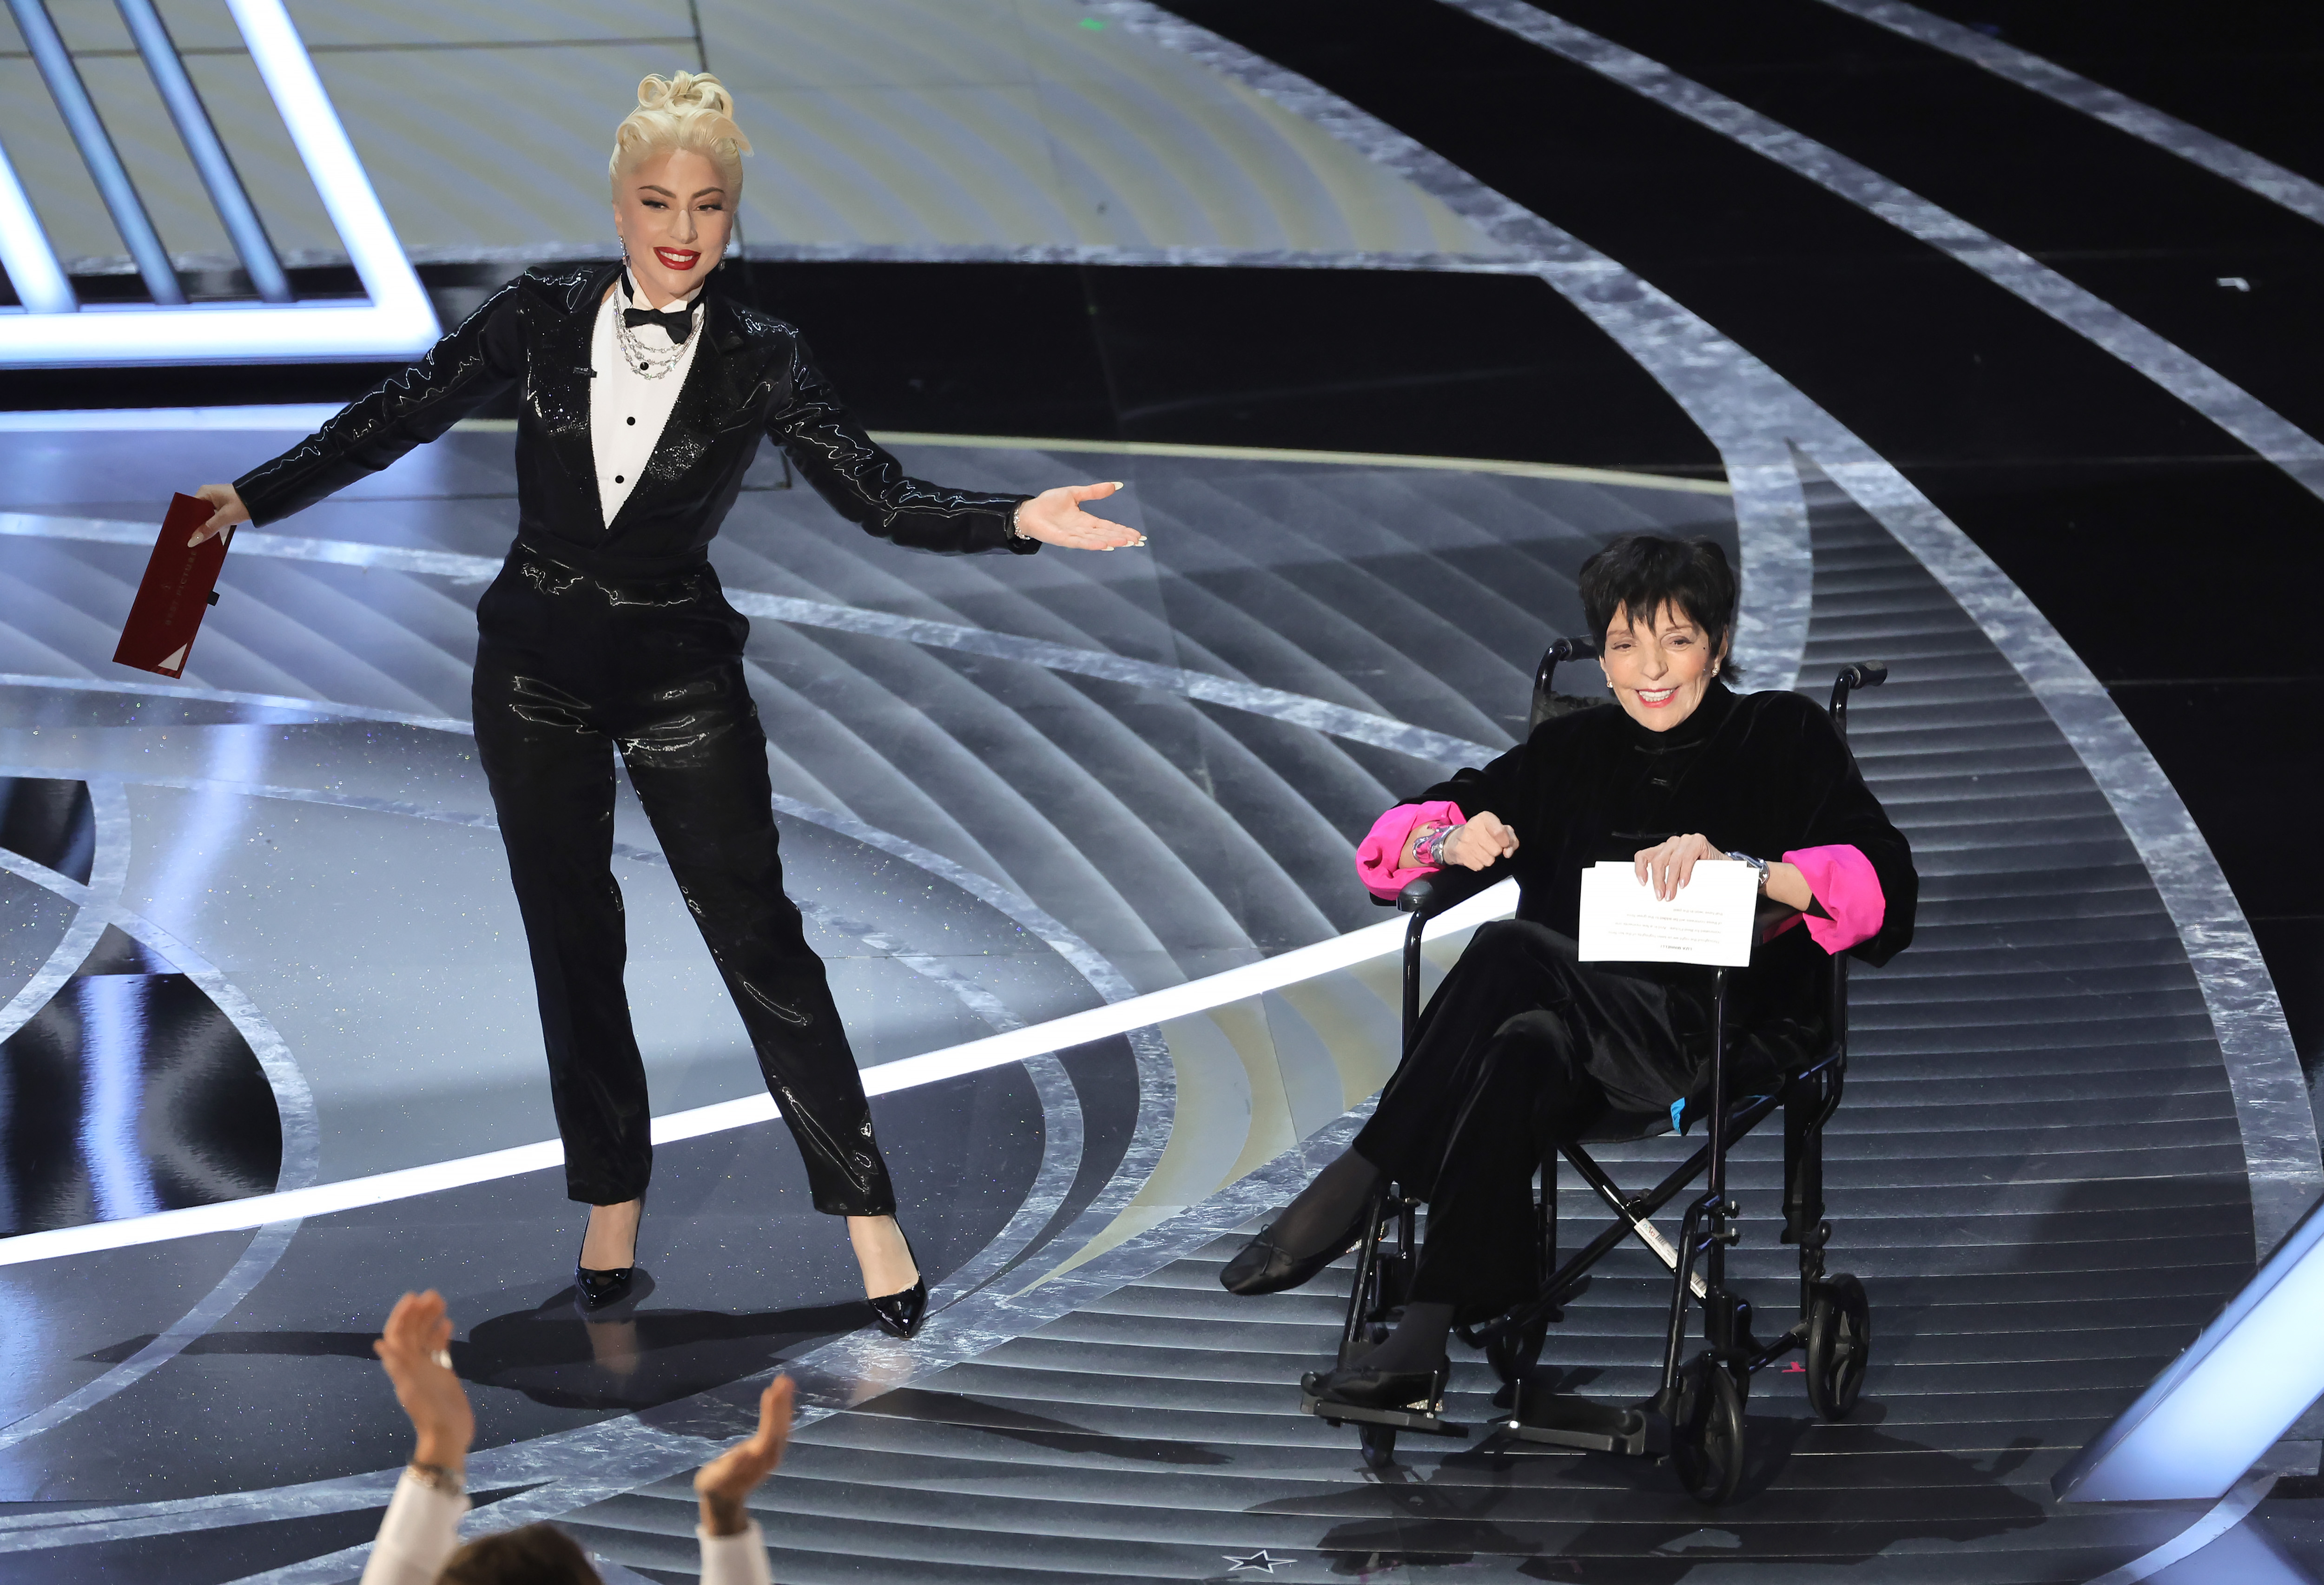 Lady Gaga and Liza Minnelli on stage during the 94th Annual Academy Awards at the Dolby Theatre on March 27, 2022, in Hollywood, California. | Source: Getty Images